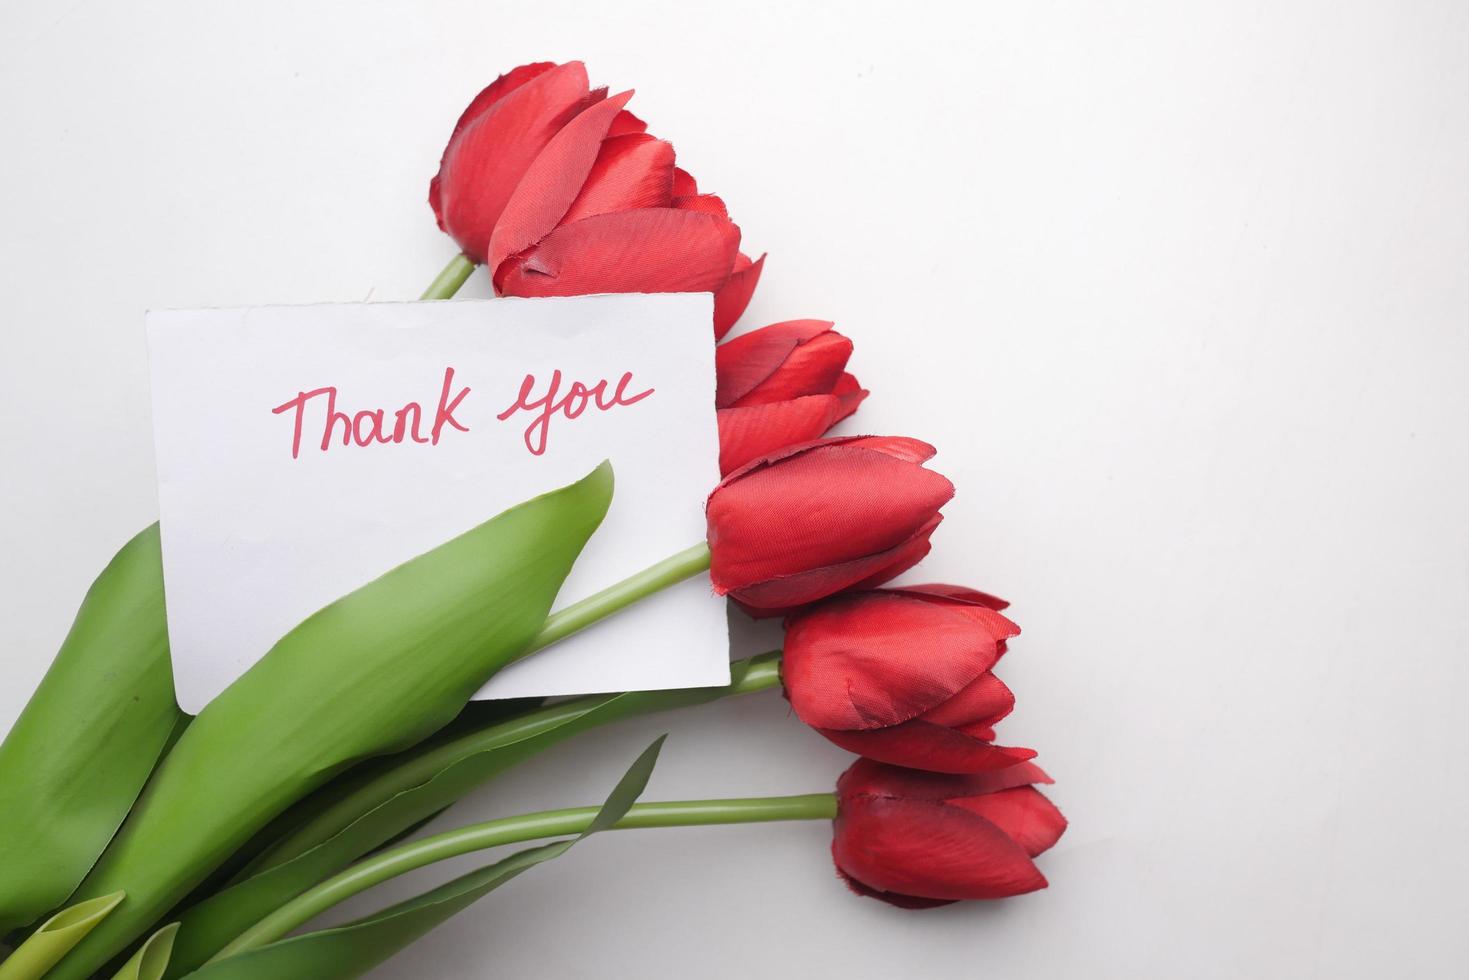 Thank you message on paper with tulip flower on white background photo